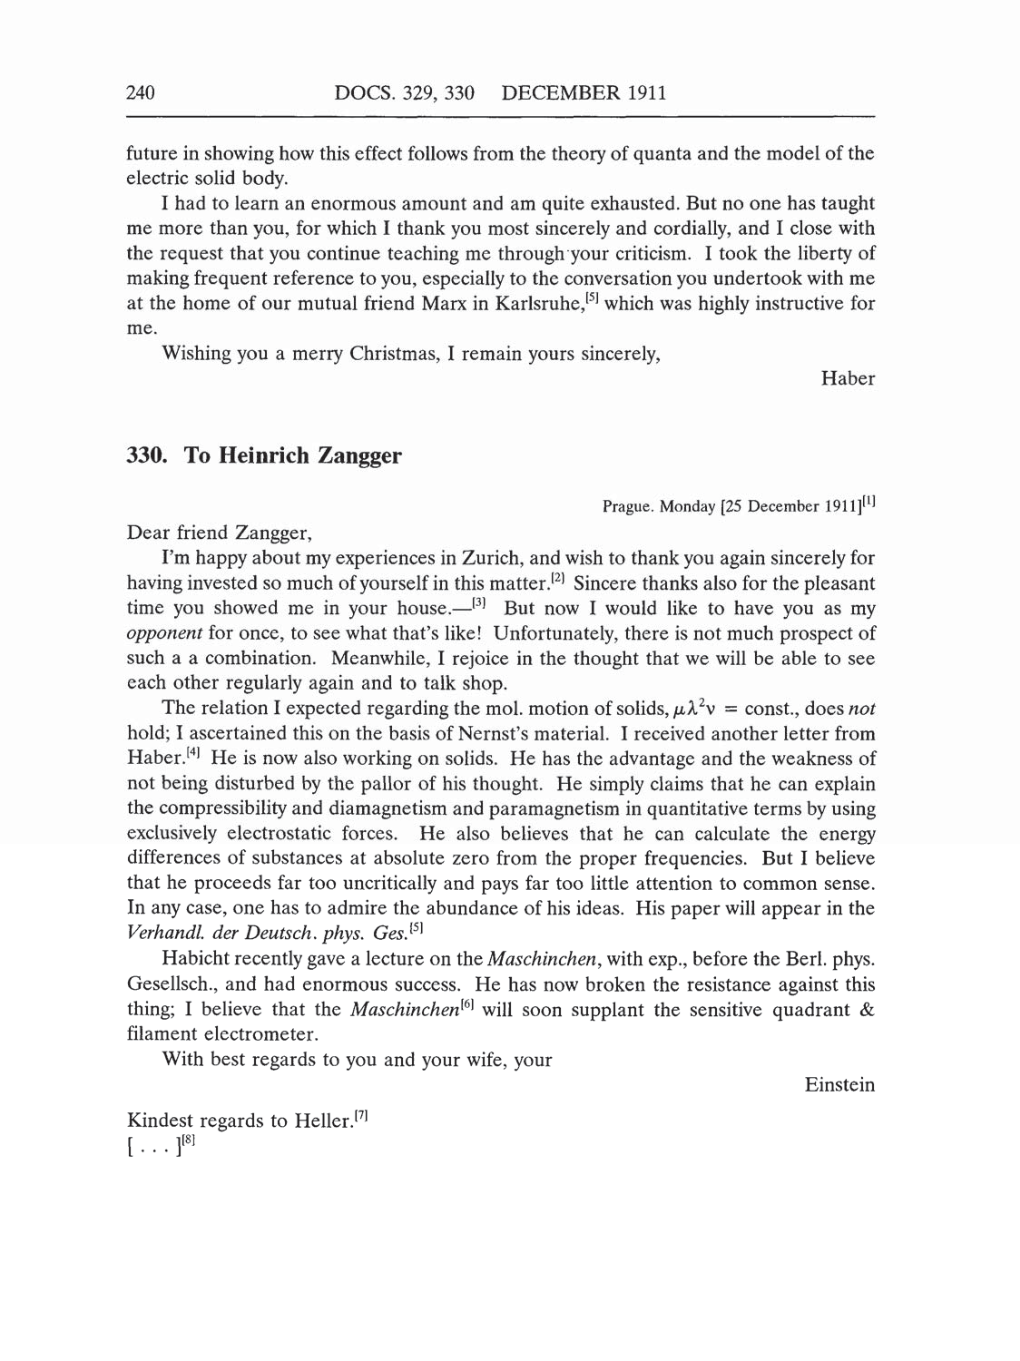 Volume 5: The Swiss Years: Correspondence, 1902-1914 (English translation supplement) page 240